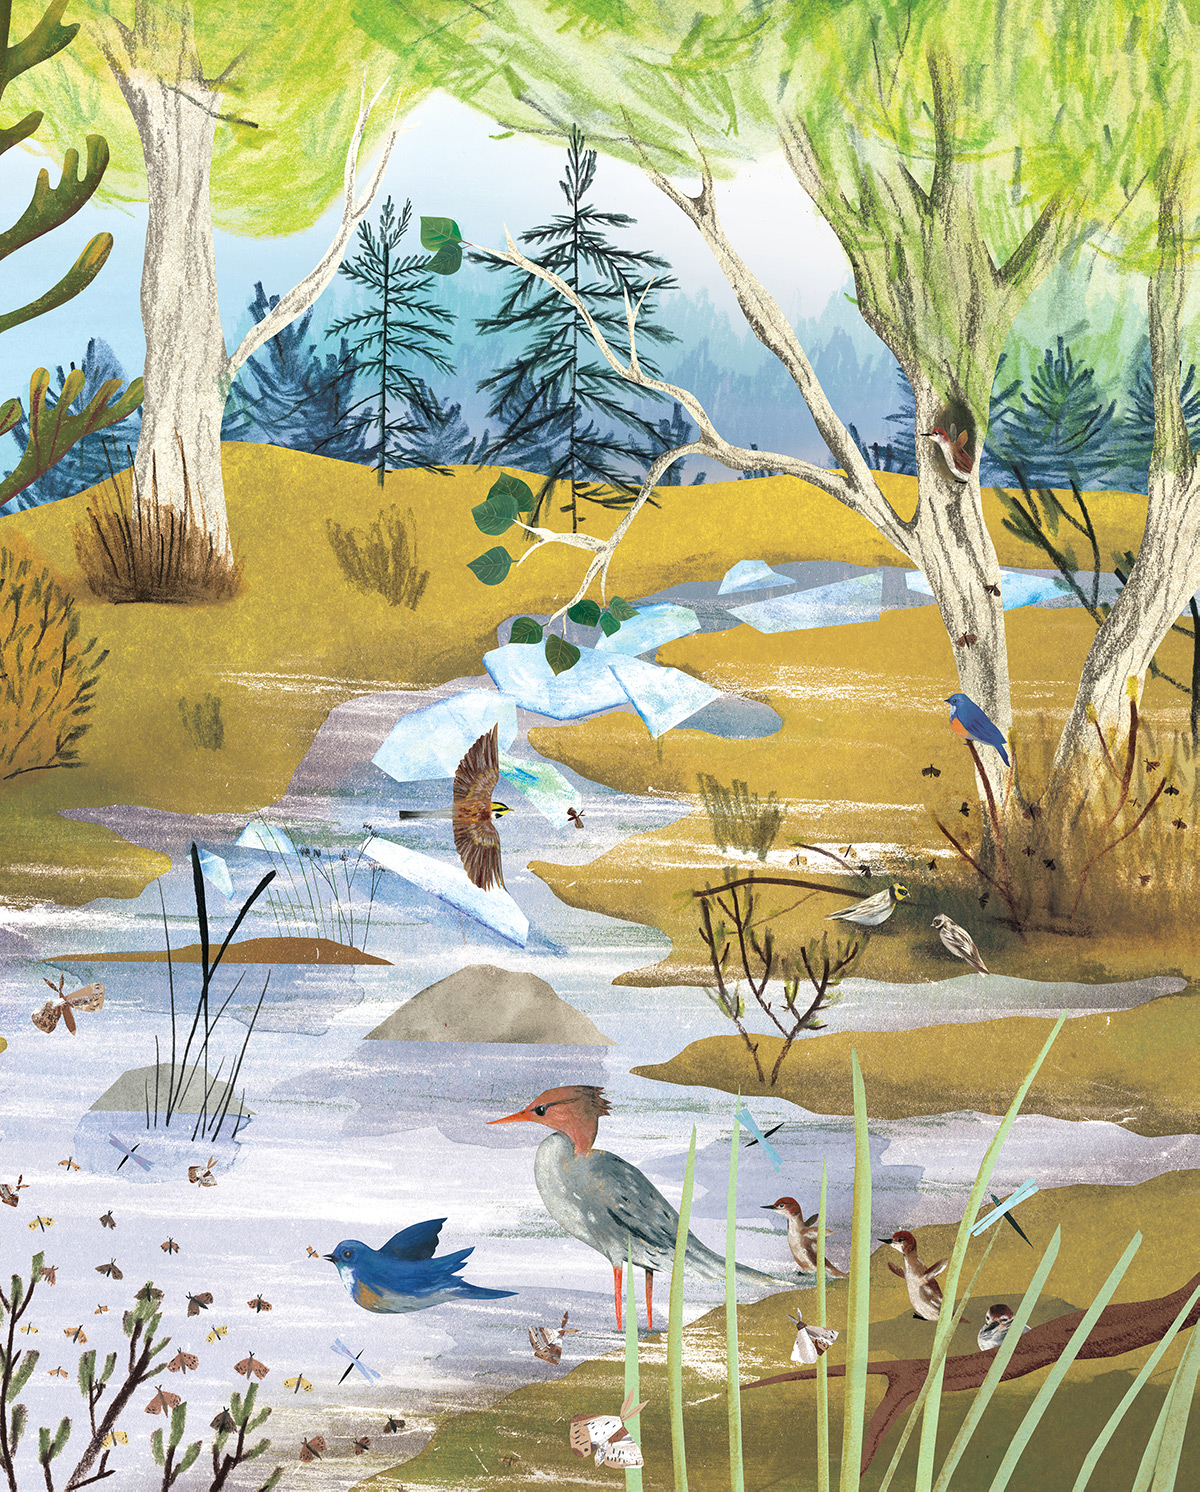 The Boreal Forest, illustration by Josée Bisaillon